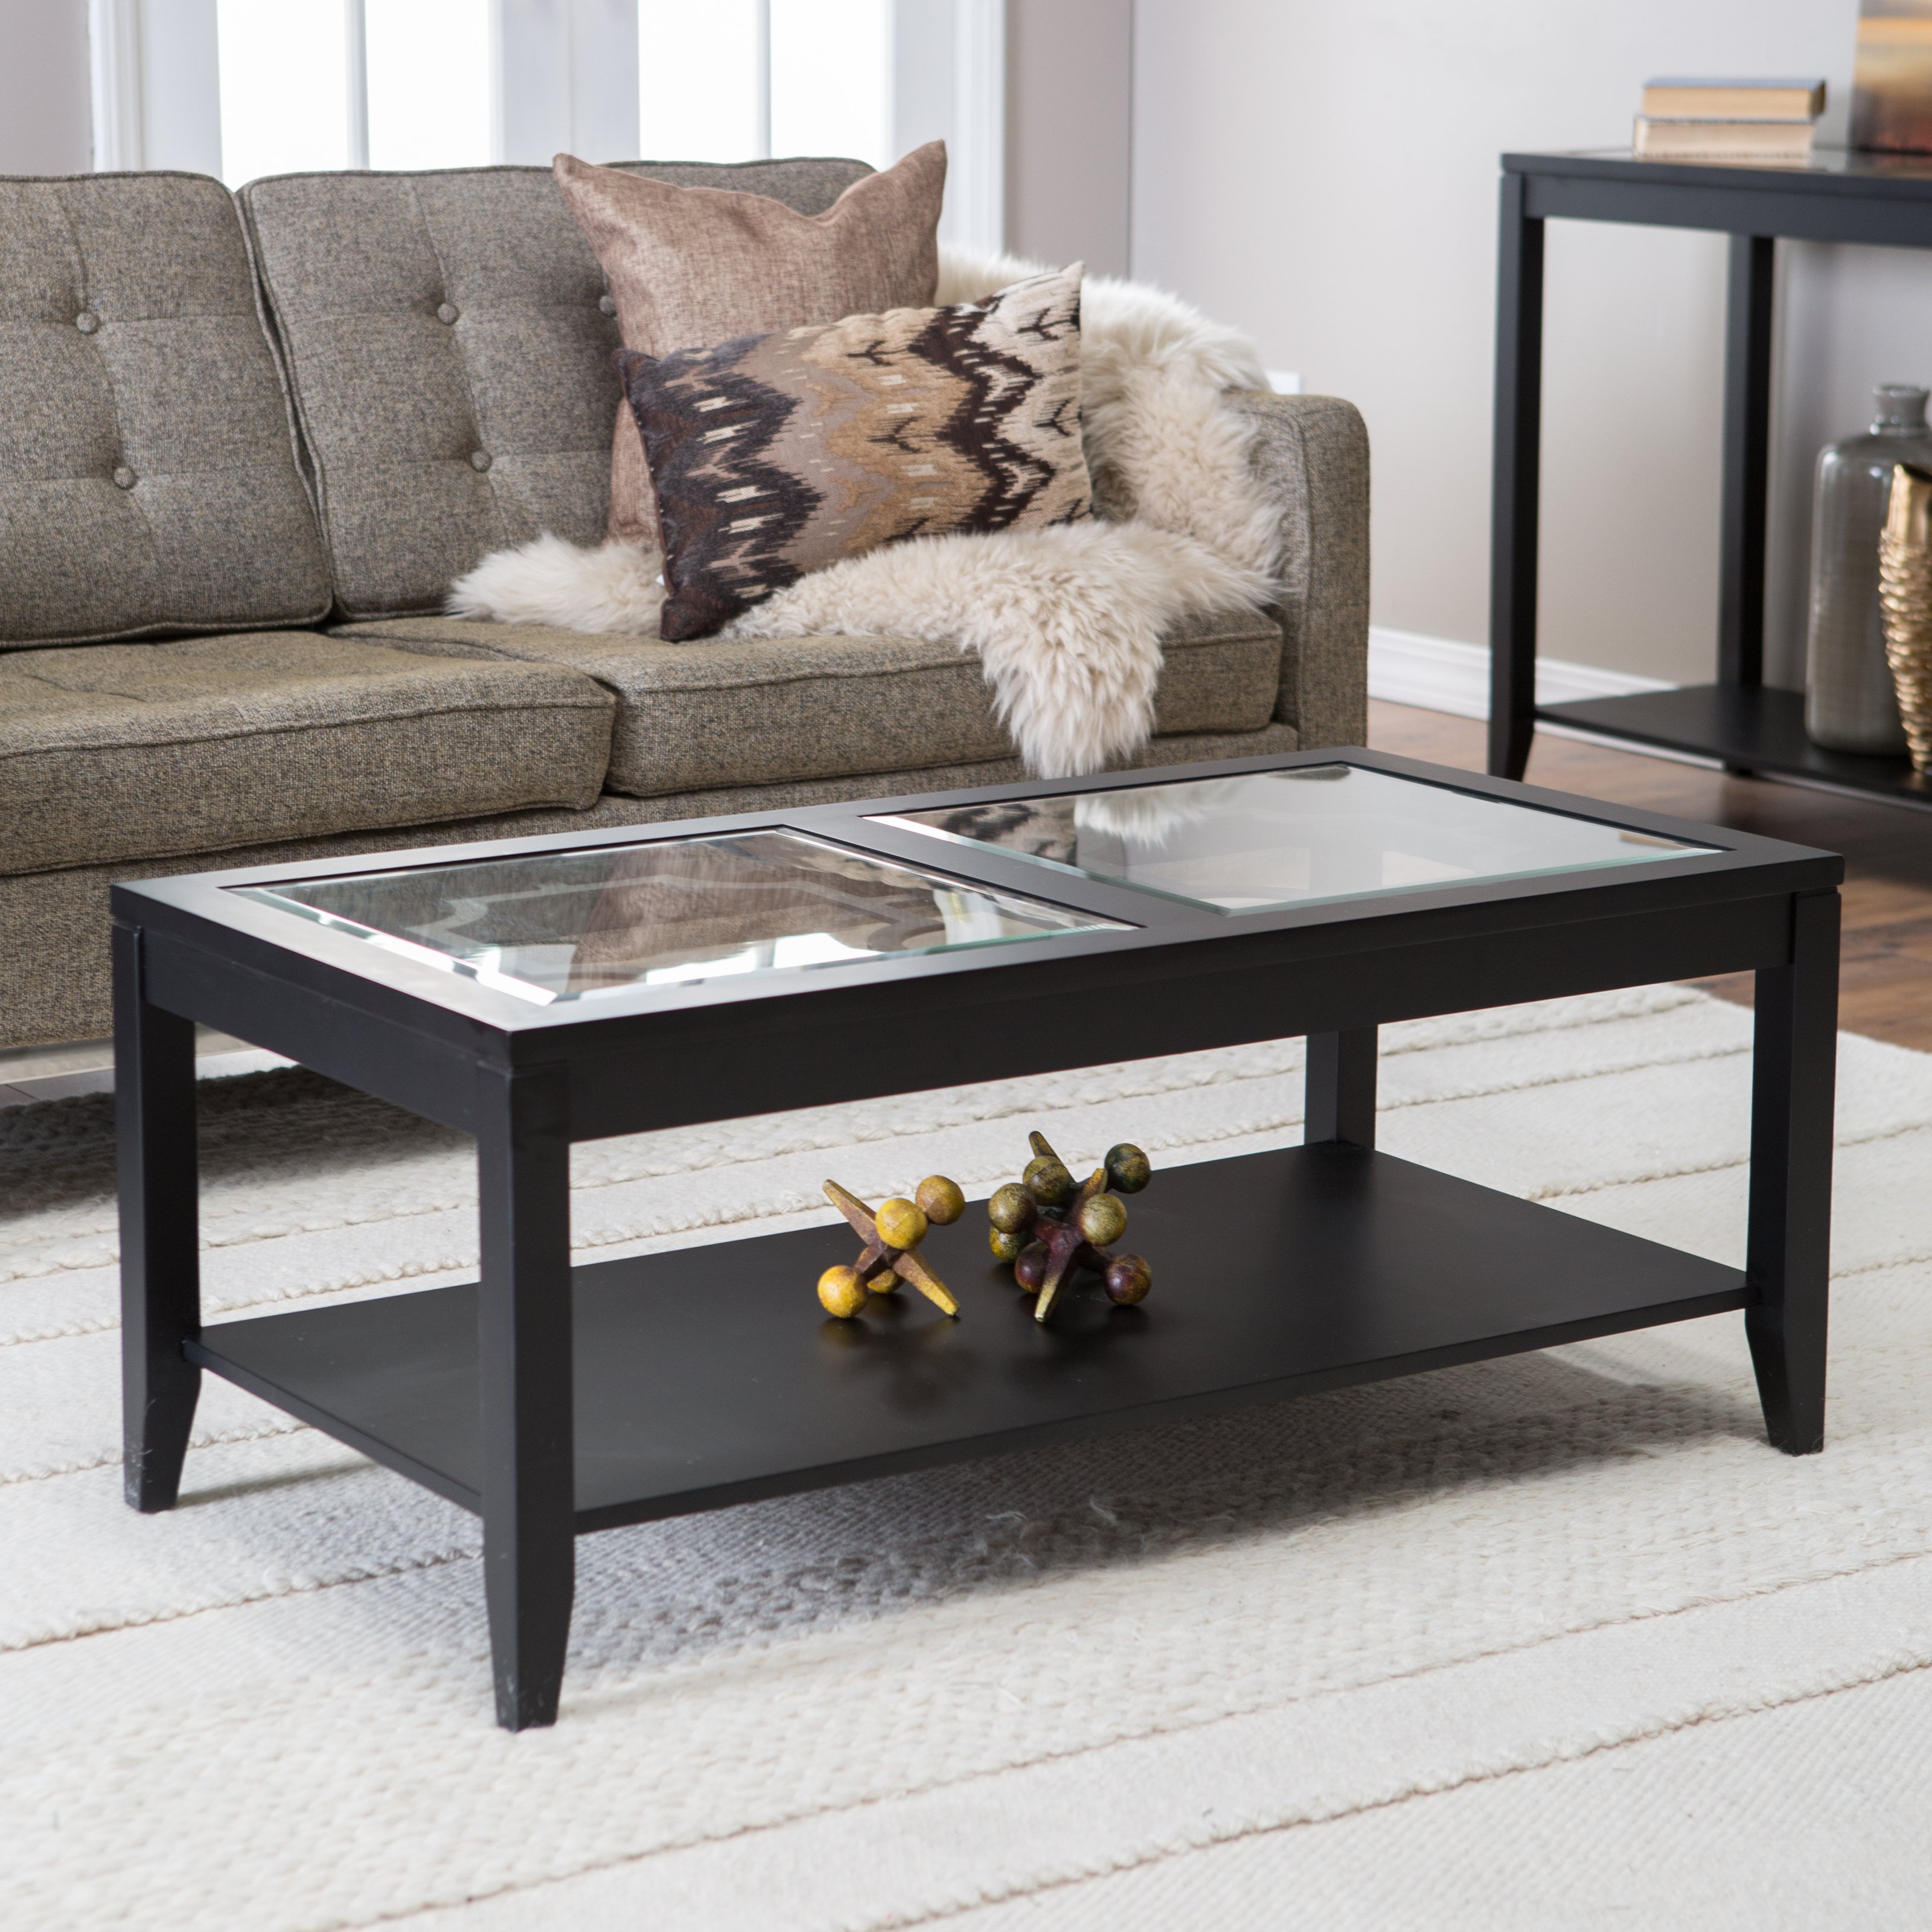 furniture carson coffee table multiple finishes endearing syrah espresso with frosted glass larkin end tables large square magnolia house line cream colored lamps antique top box